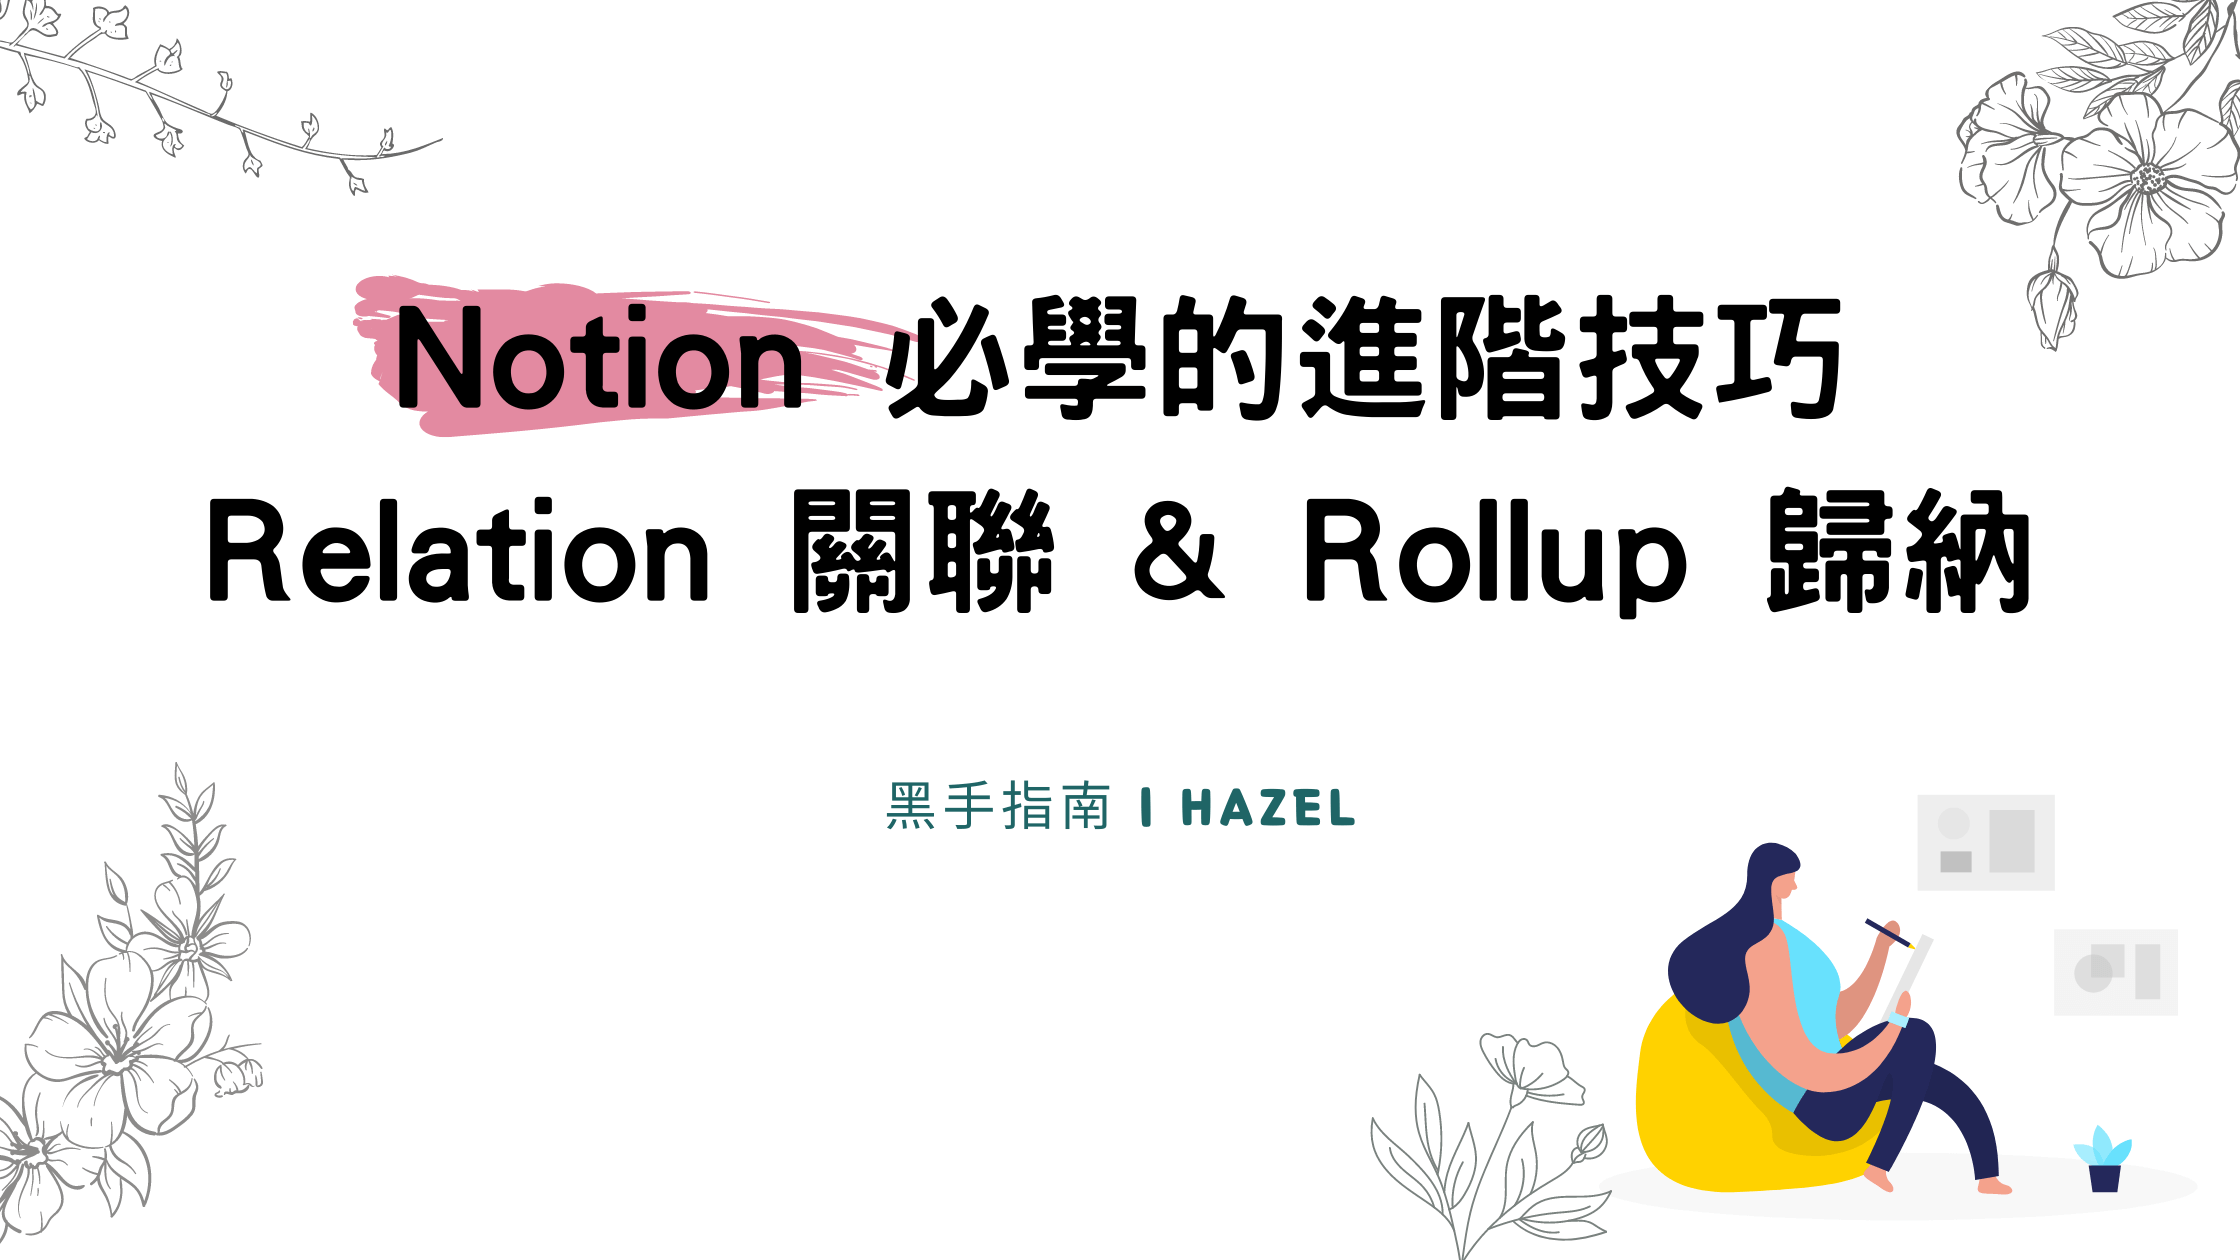 Notion 教學：Relation 關聯 &Rollup 歸納